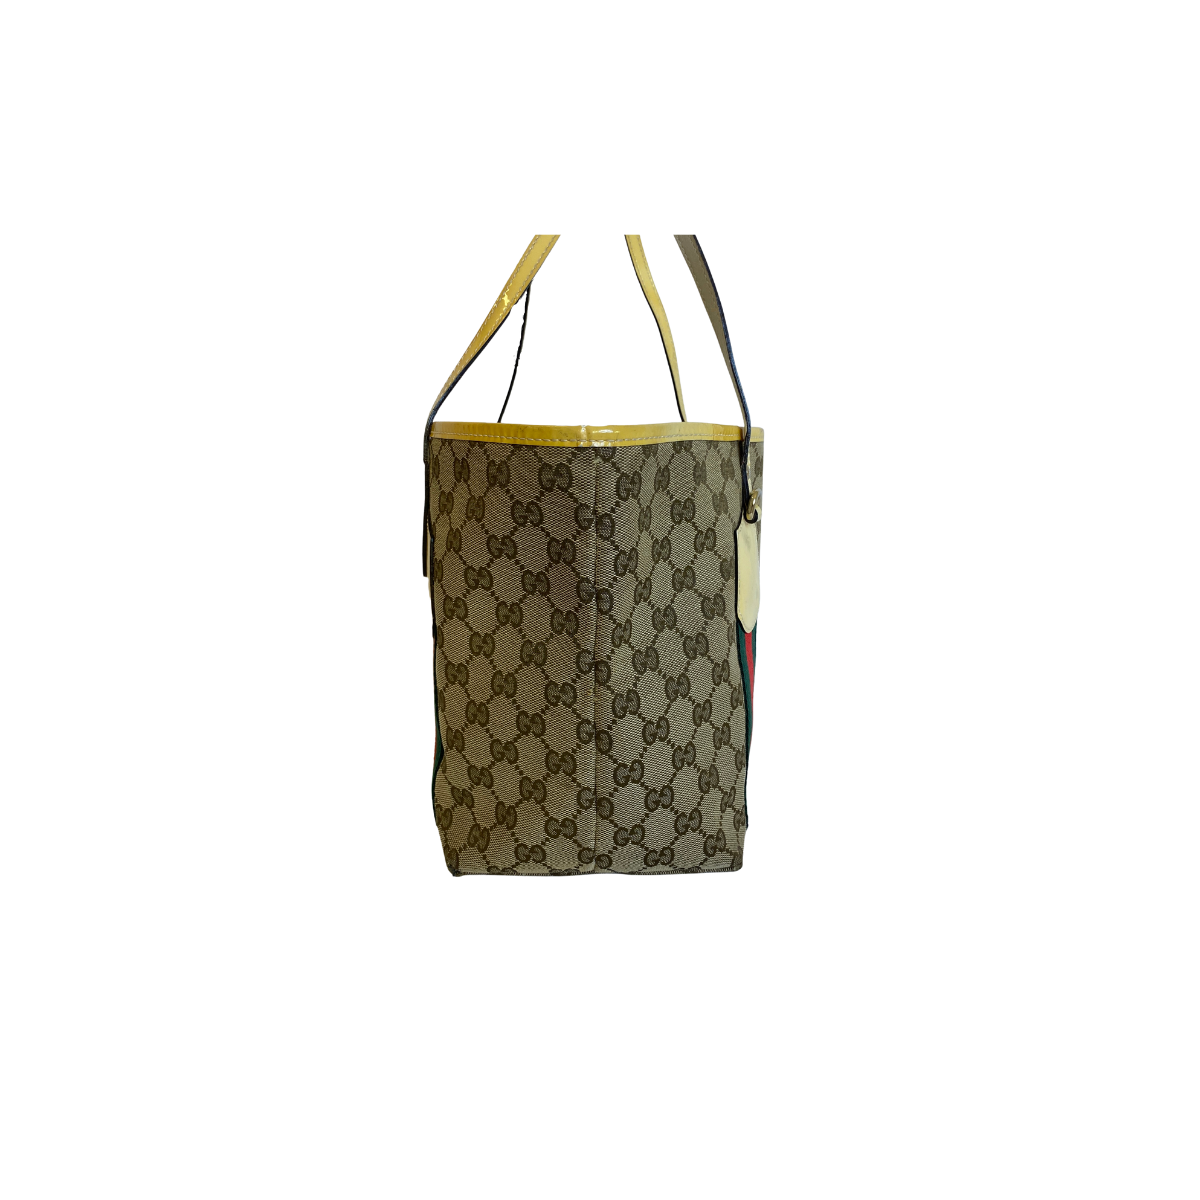 Gucci Gucci GG Sherry Line Tote Bag Coated Canvas - Τσάντες ώμου - Etoile Luxury Vintage